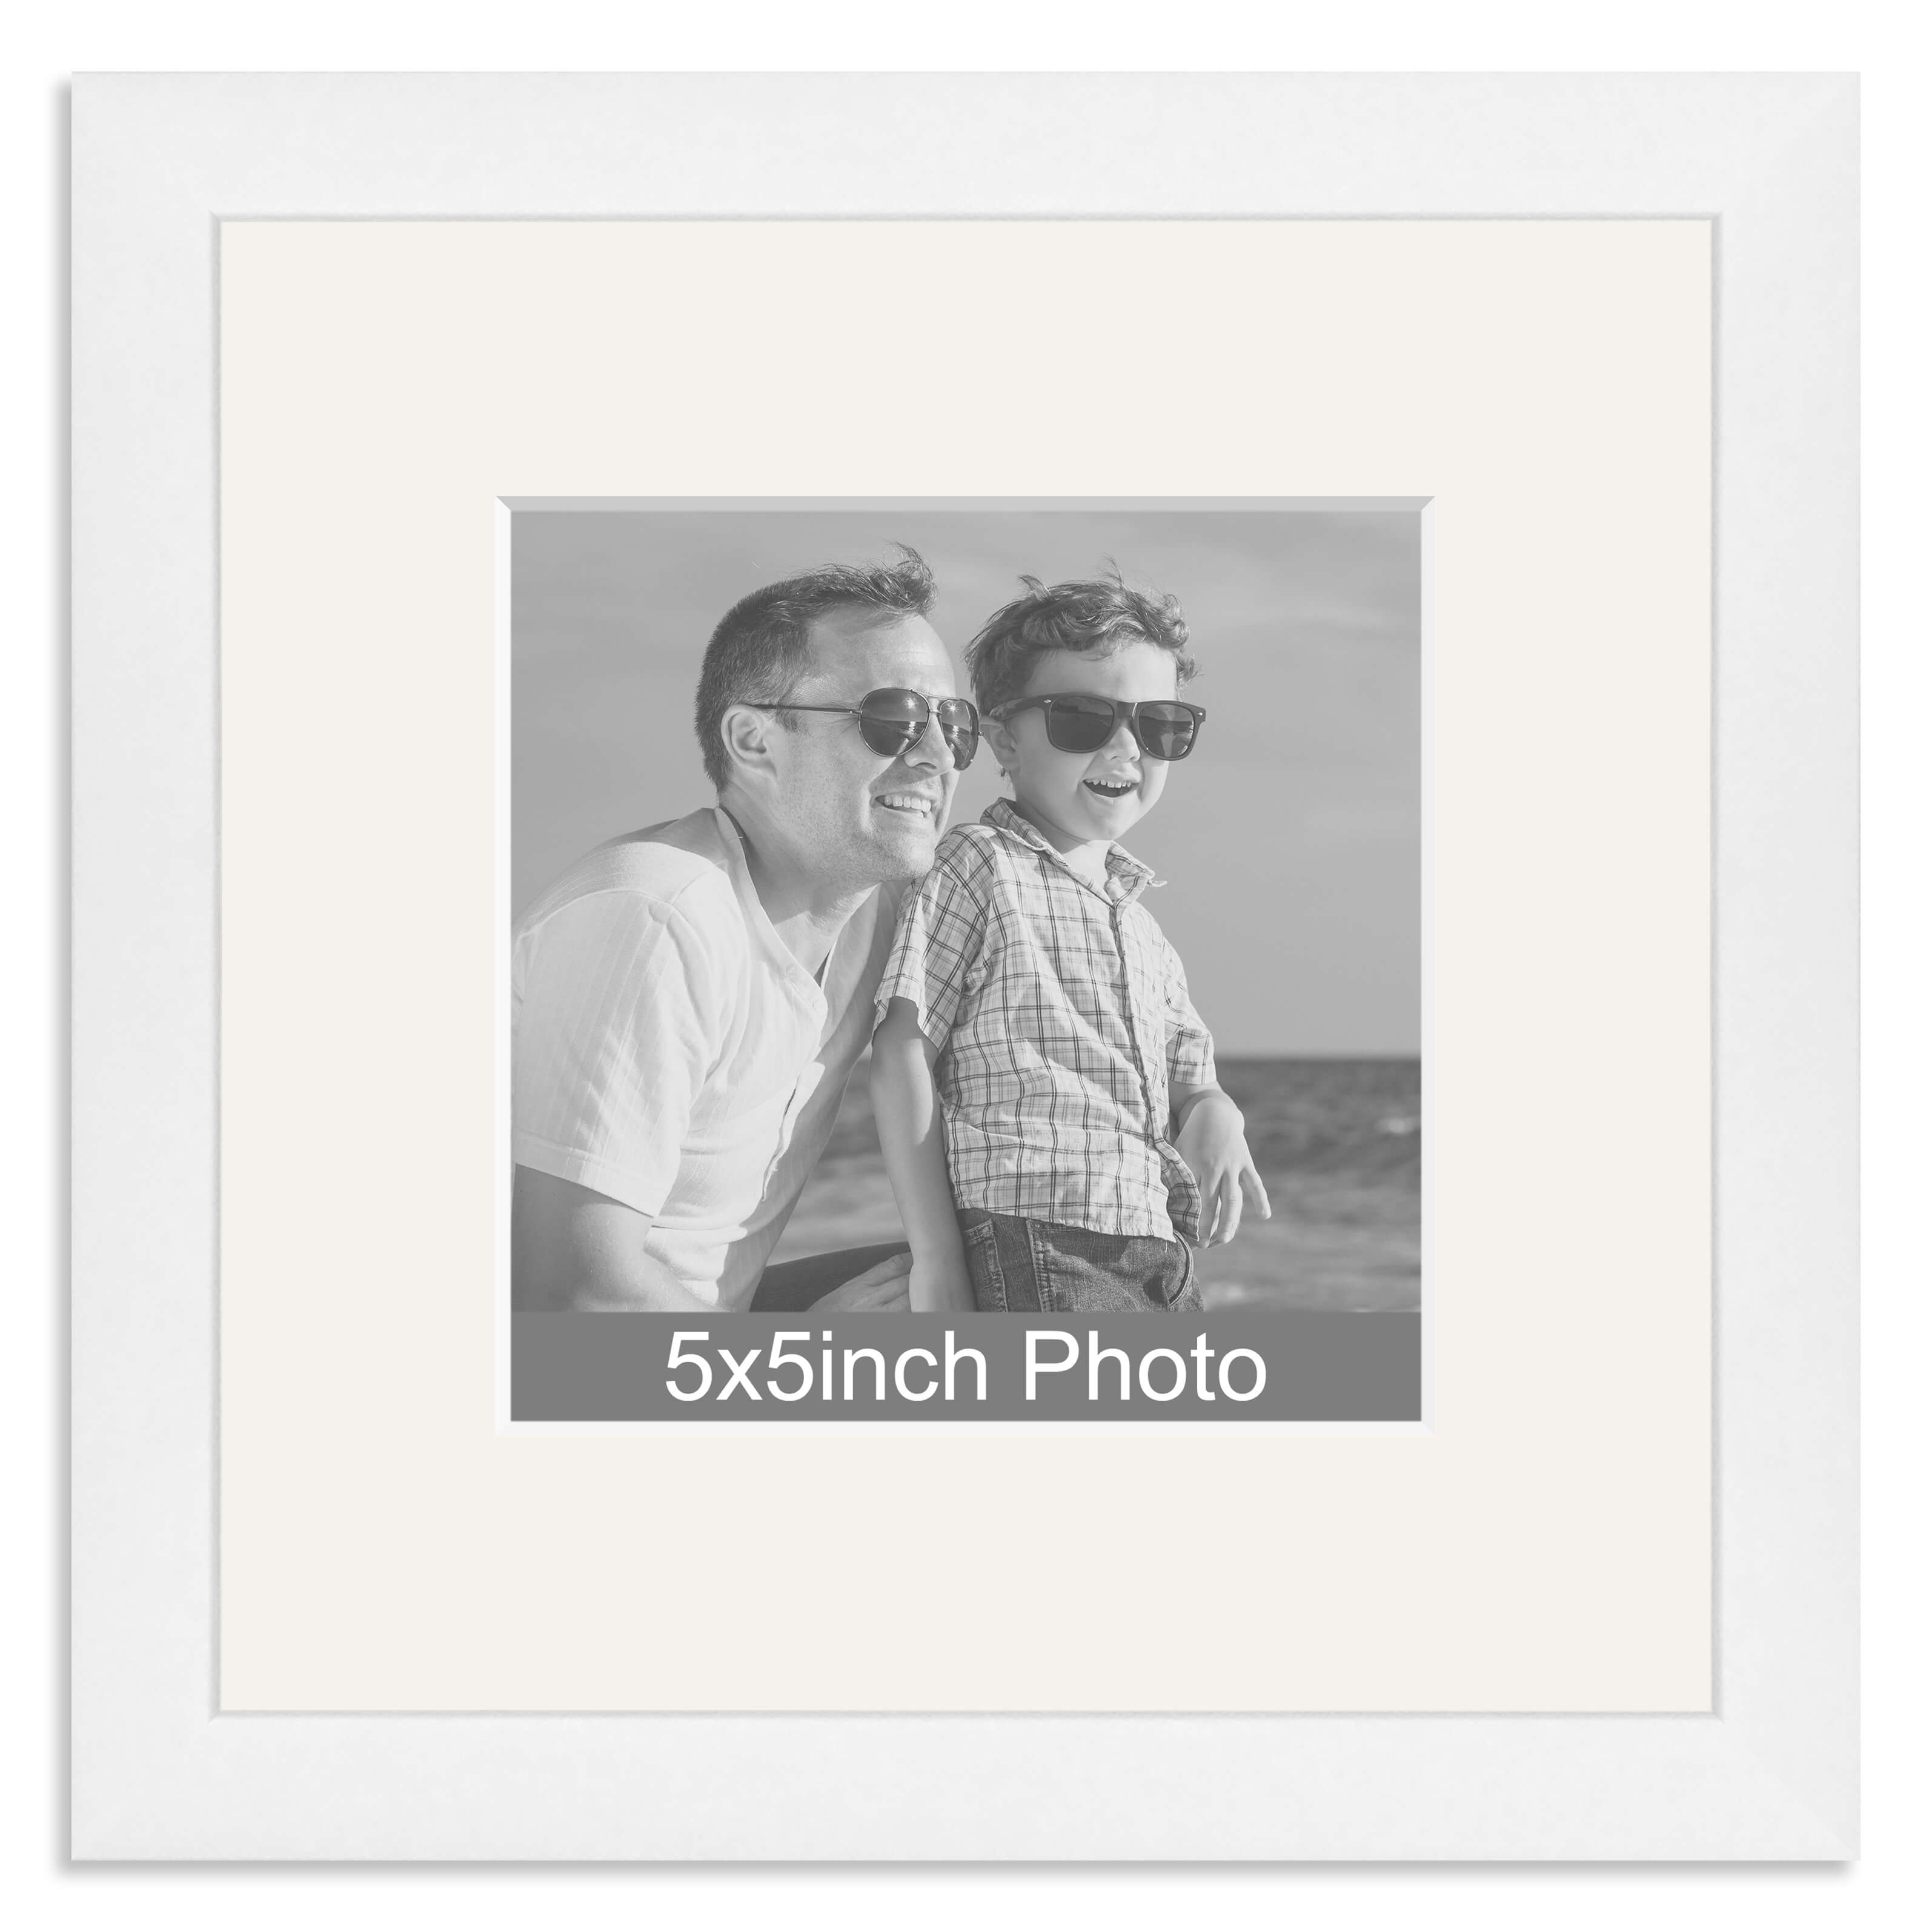 White Wooden Photo Frame with mount for a 5x5in Photo – Photo uploaded below